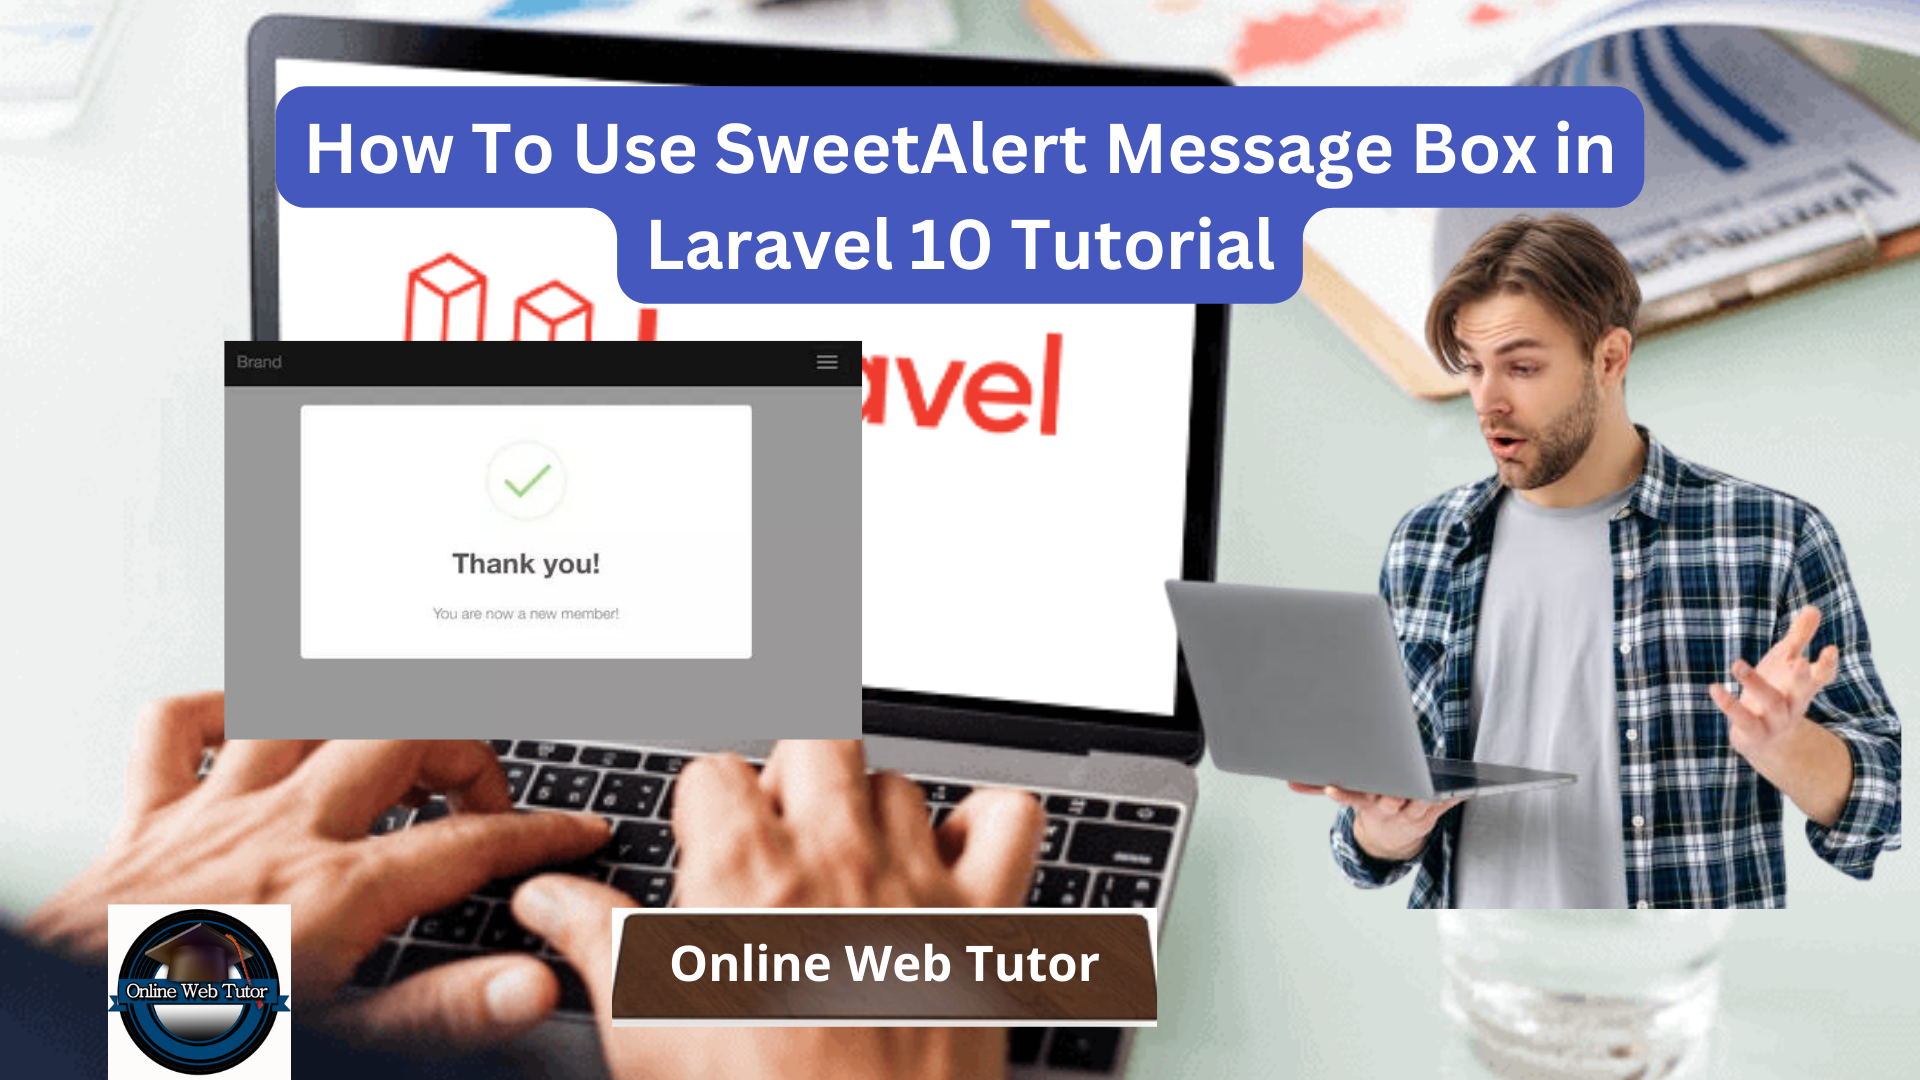 How To Use SweetAlert Message Box in Laravel 10 Tutorial